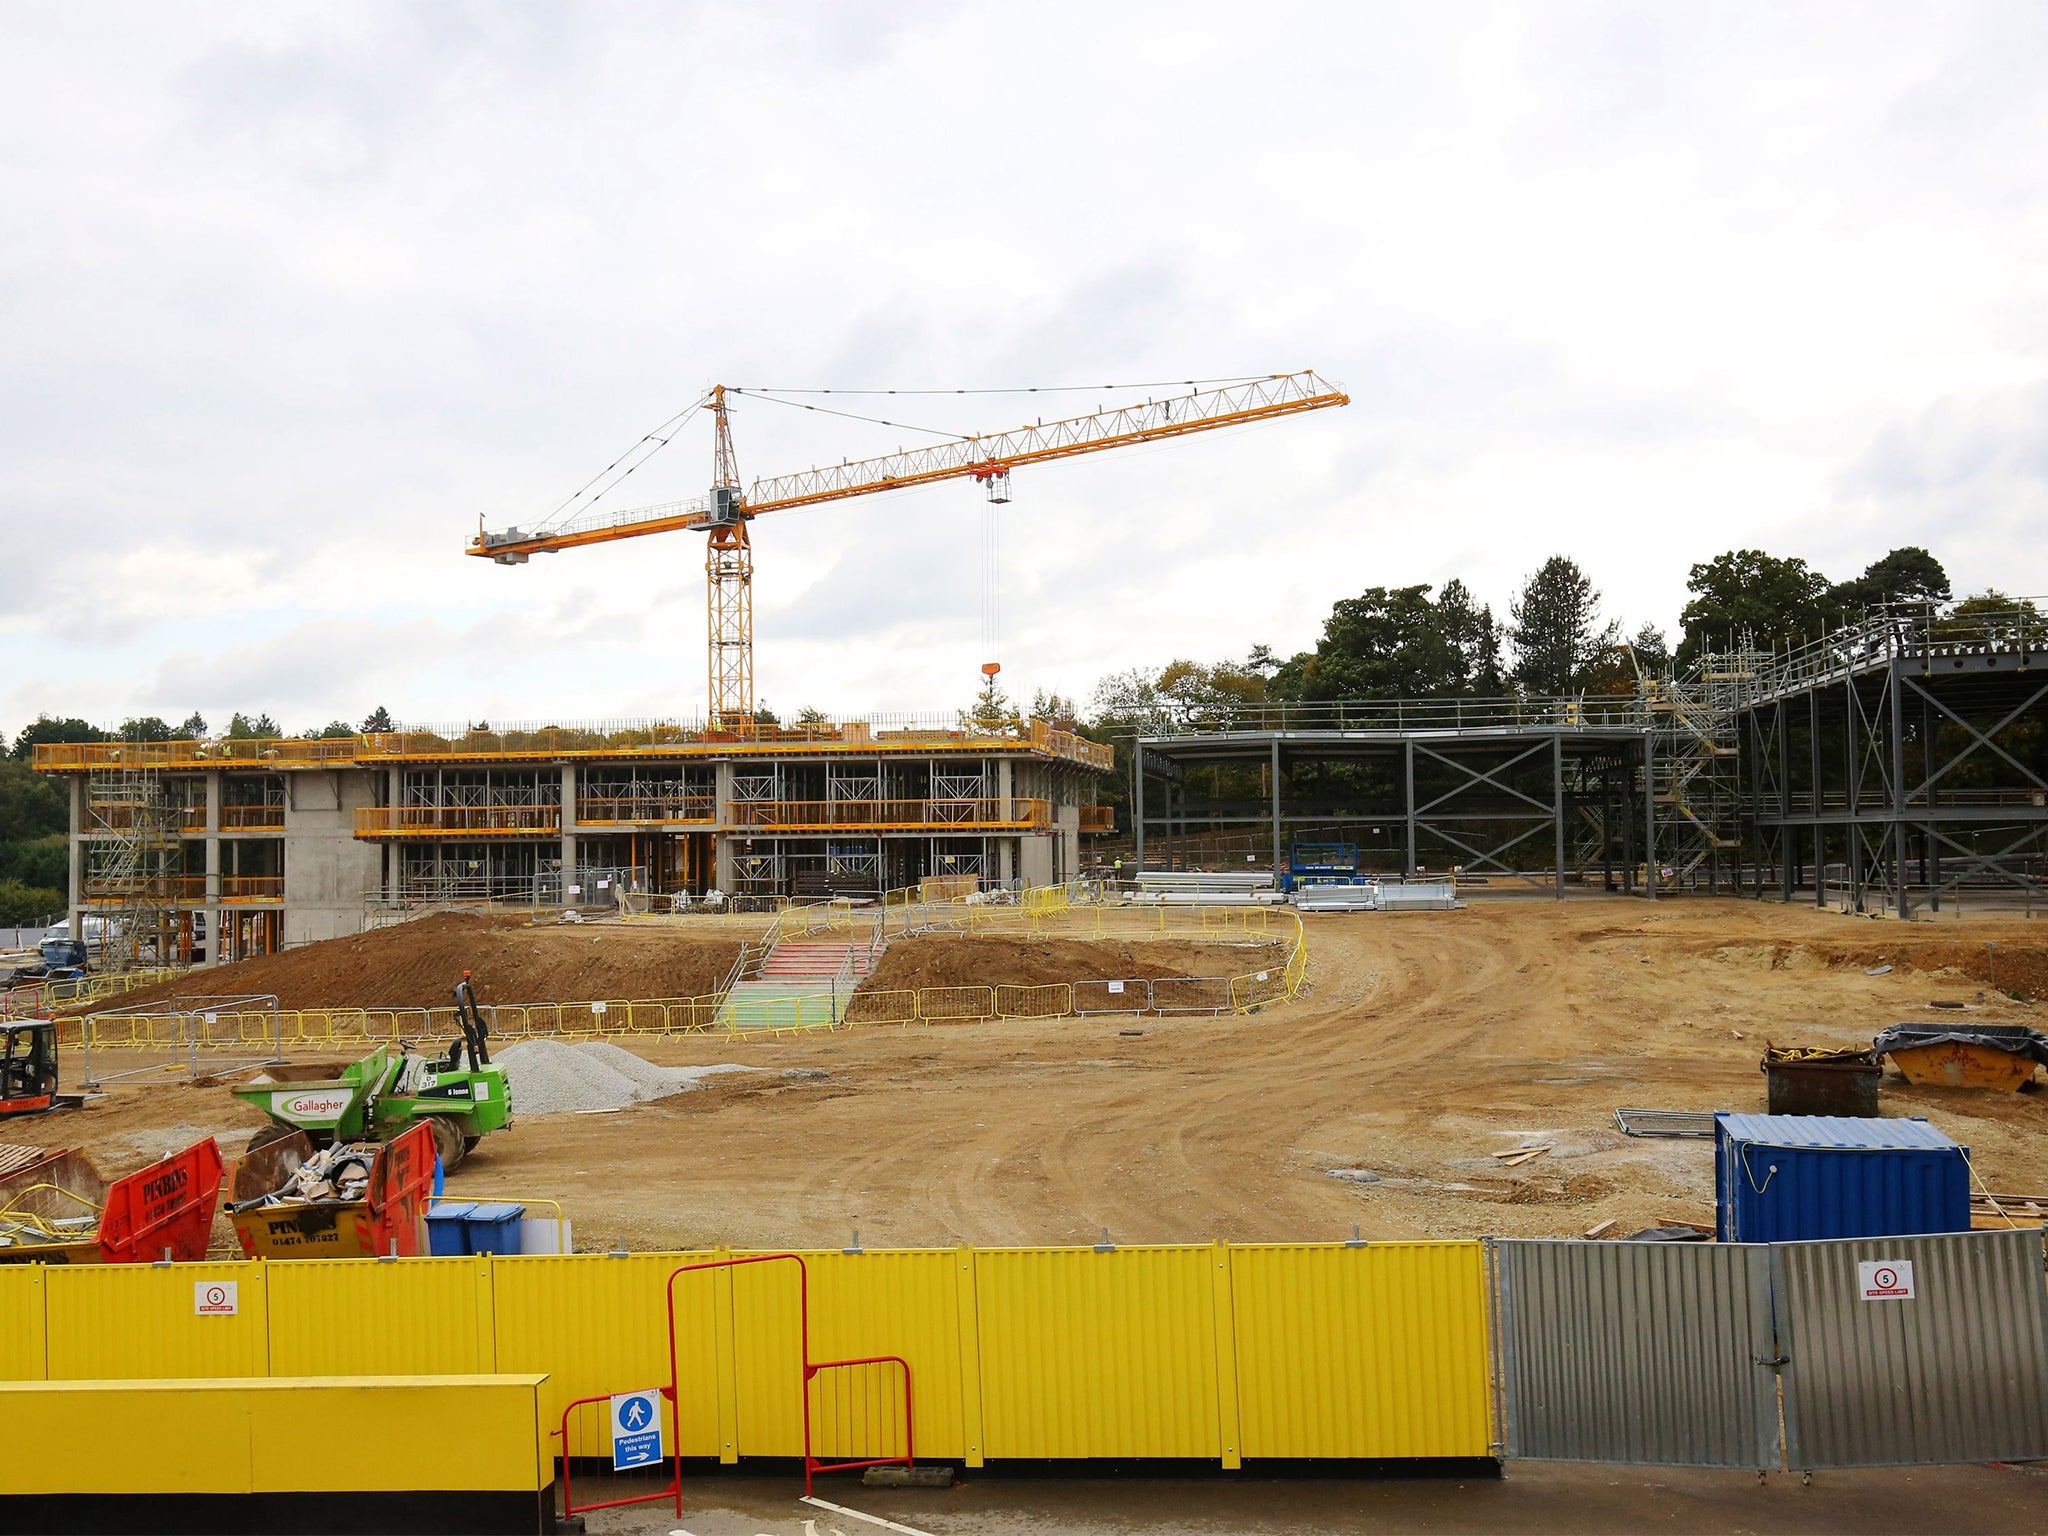 The construction site in Sevenoaks, Kent, where the first "new" grammar school in 50 years has been approved,